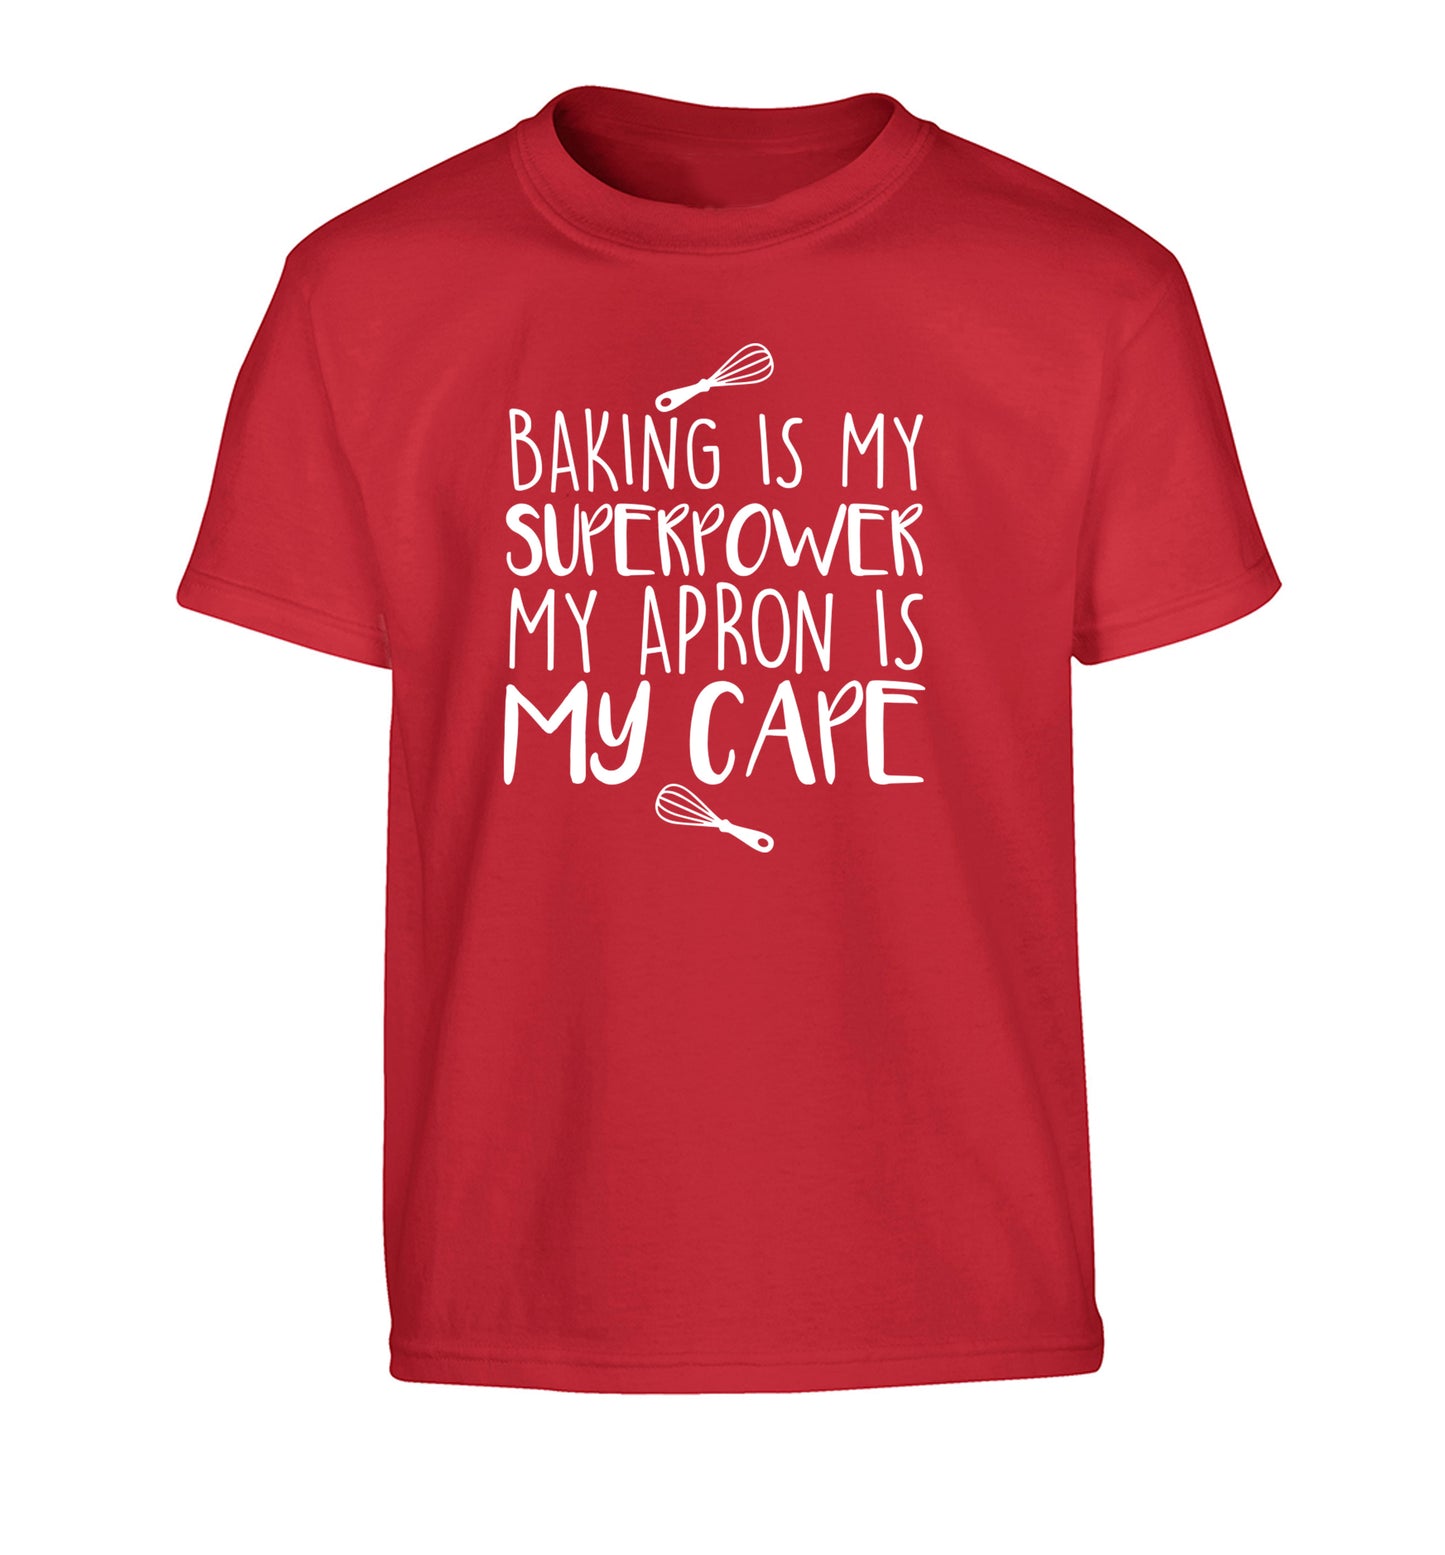 Baking is my superpower my apron is my cape Children's red Tshirt 12-14 Years